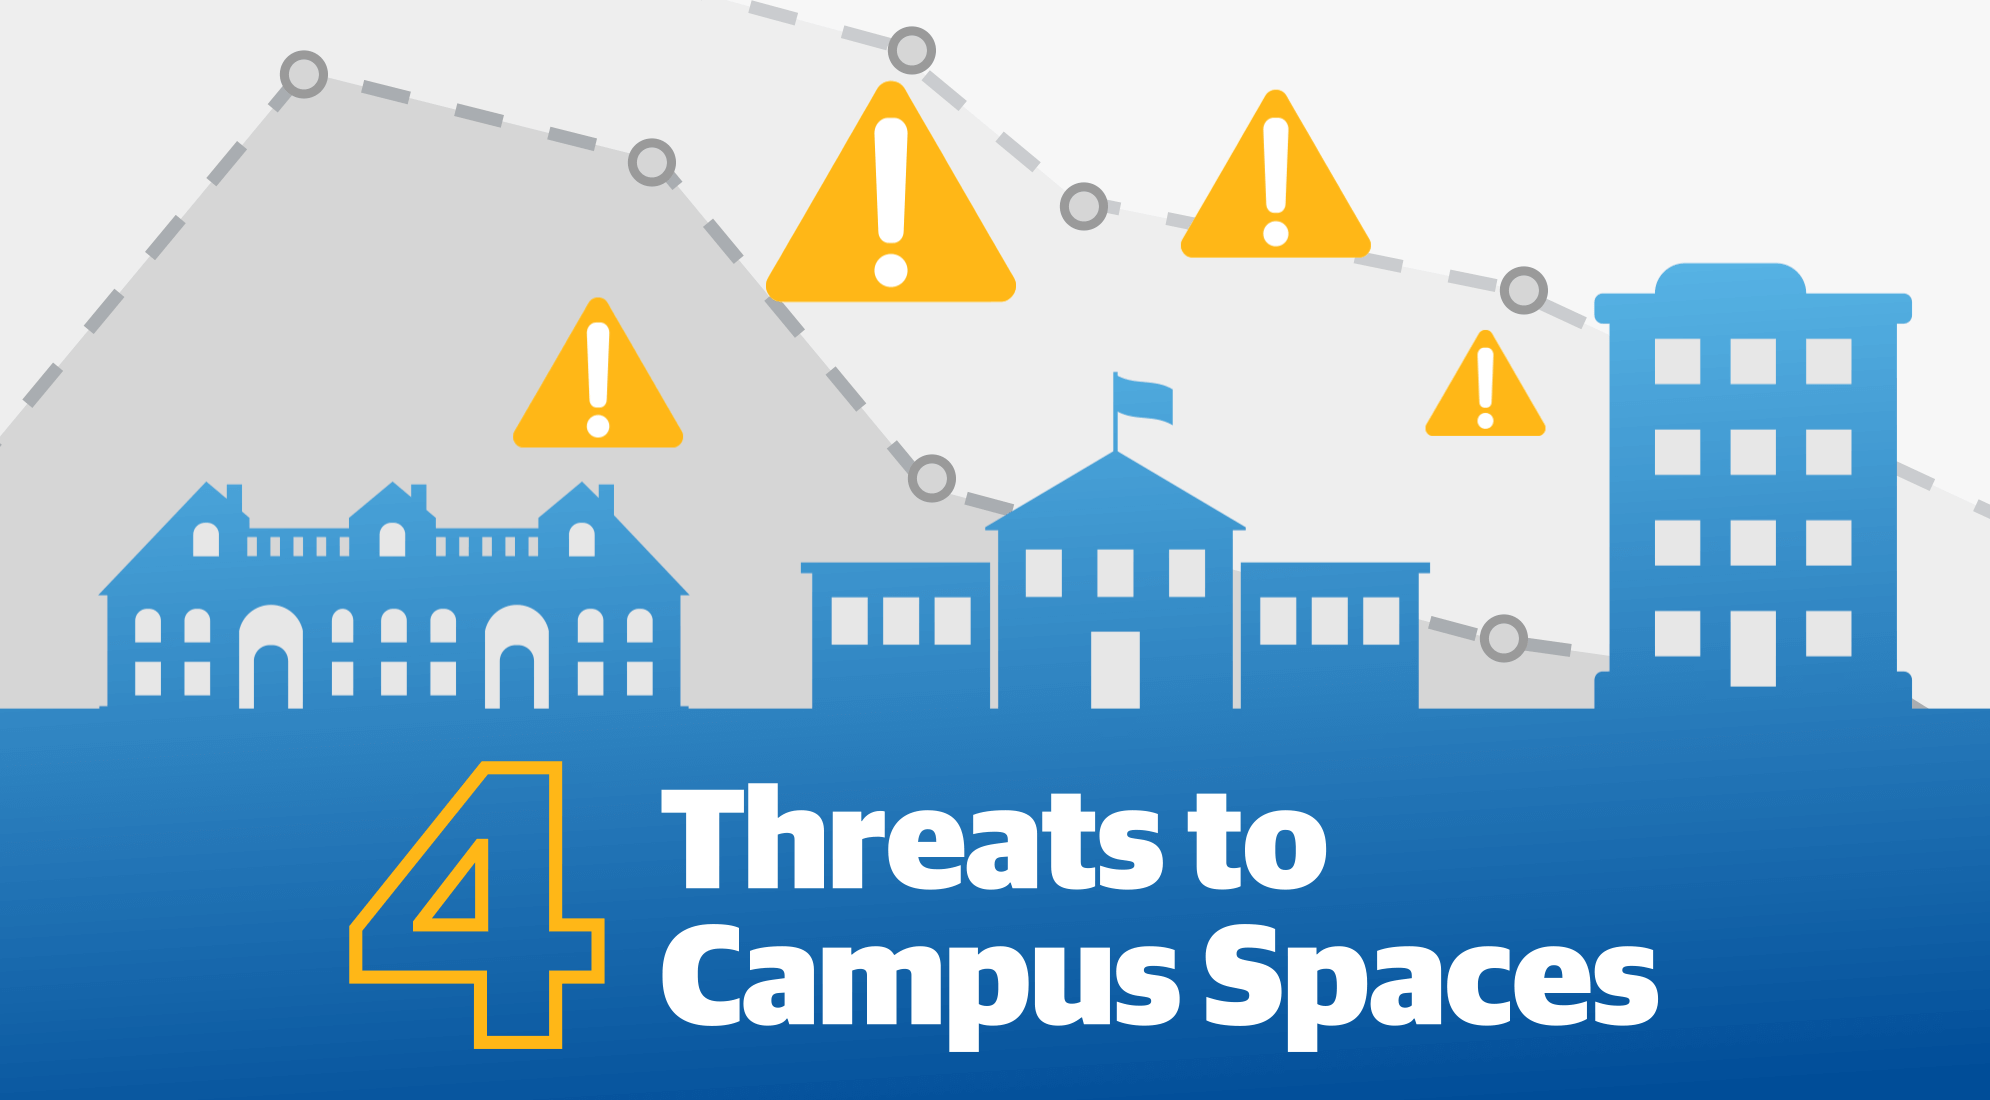 4 Threats to Campus Spaces from the State of Facilities in Higher Education